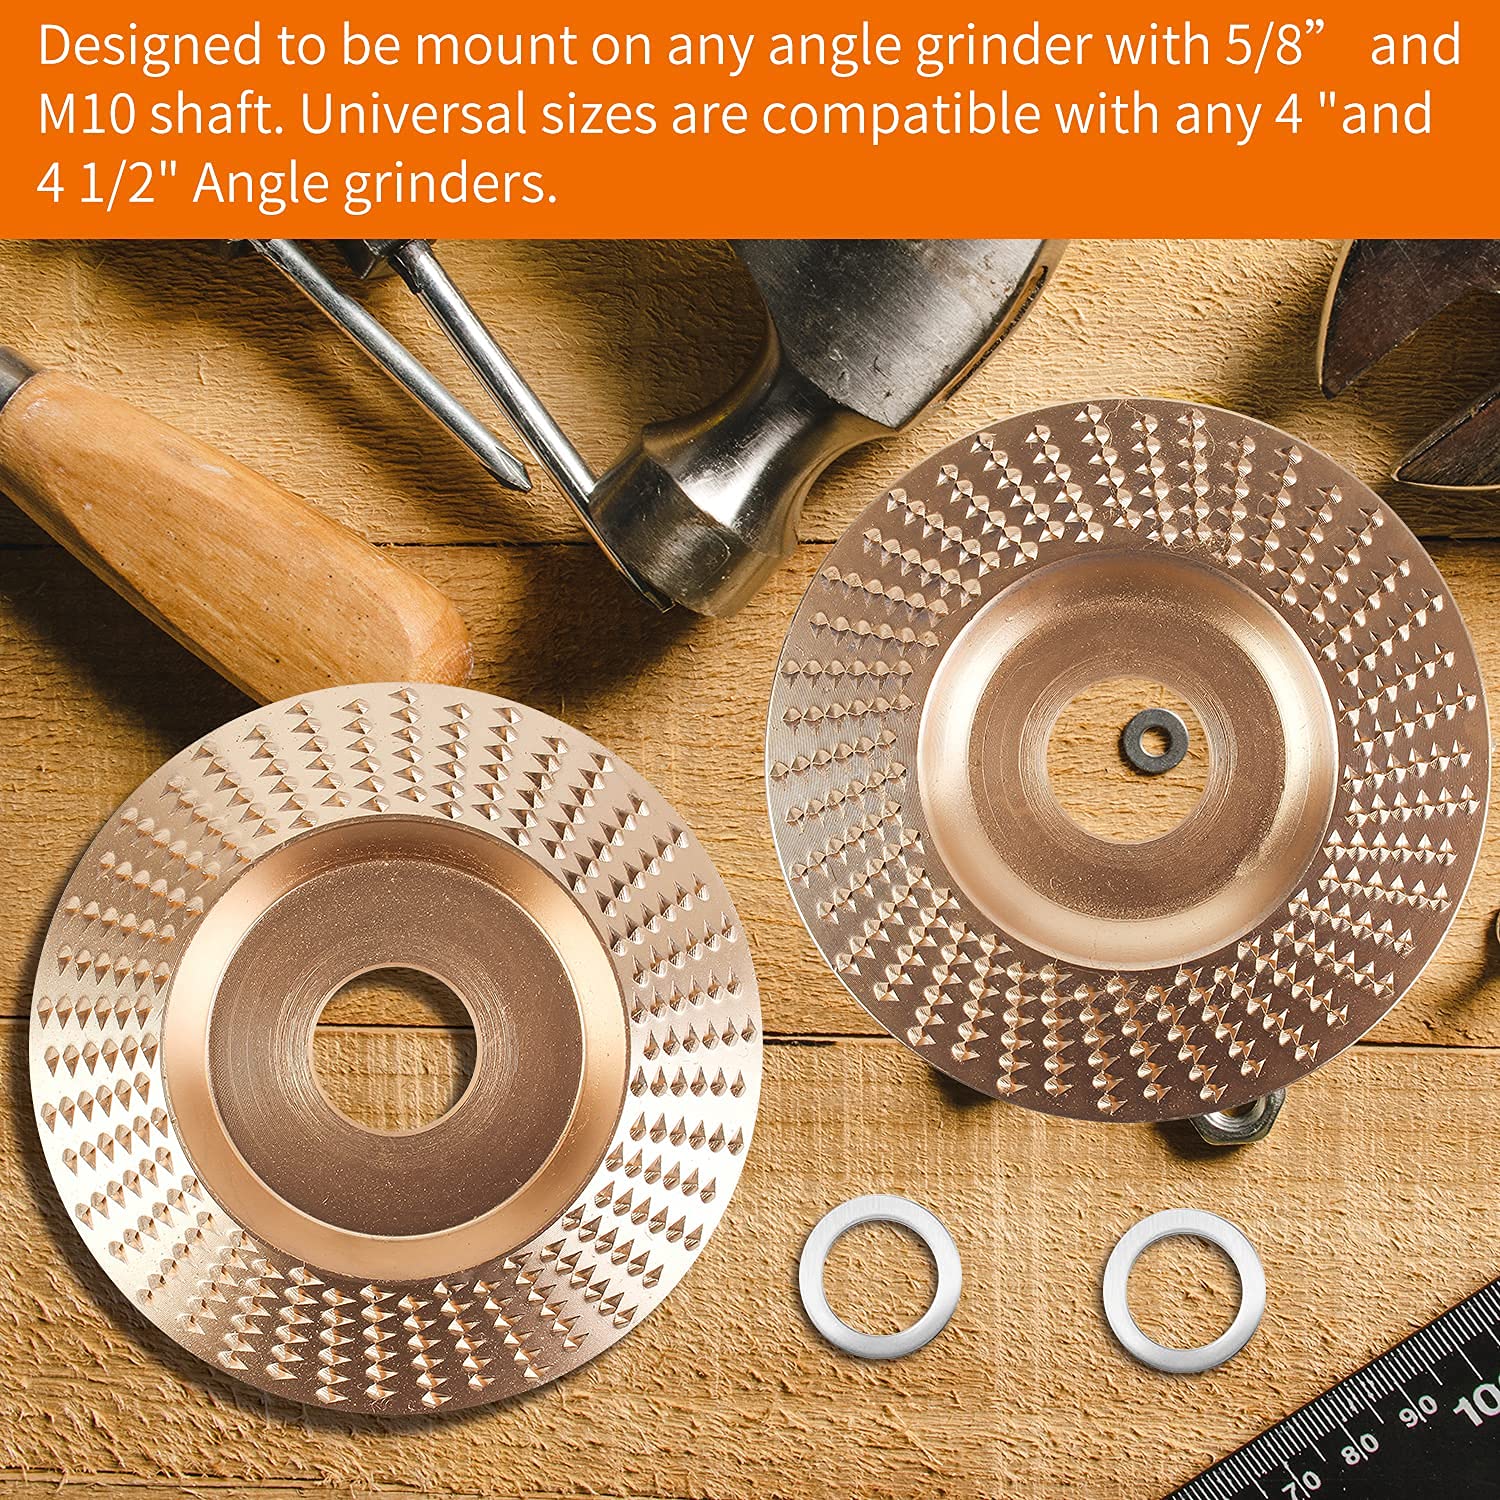 Pomsare Upgraded 3PCS Wood Carving Disc Set for 4" or 4 1/2" Angle Grinder with 5/8" Arbor, Grinding Wheel Shaping Disc for Wood Cutting, Grinder Cutting Wheel Attachments